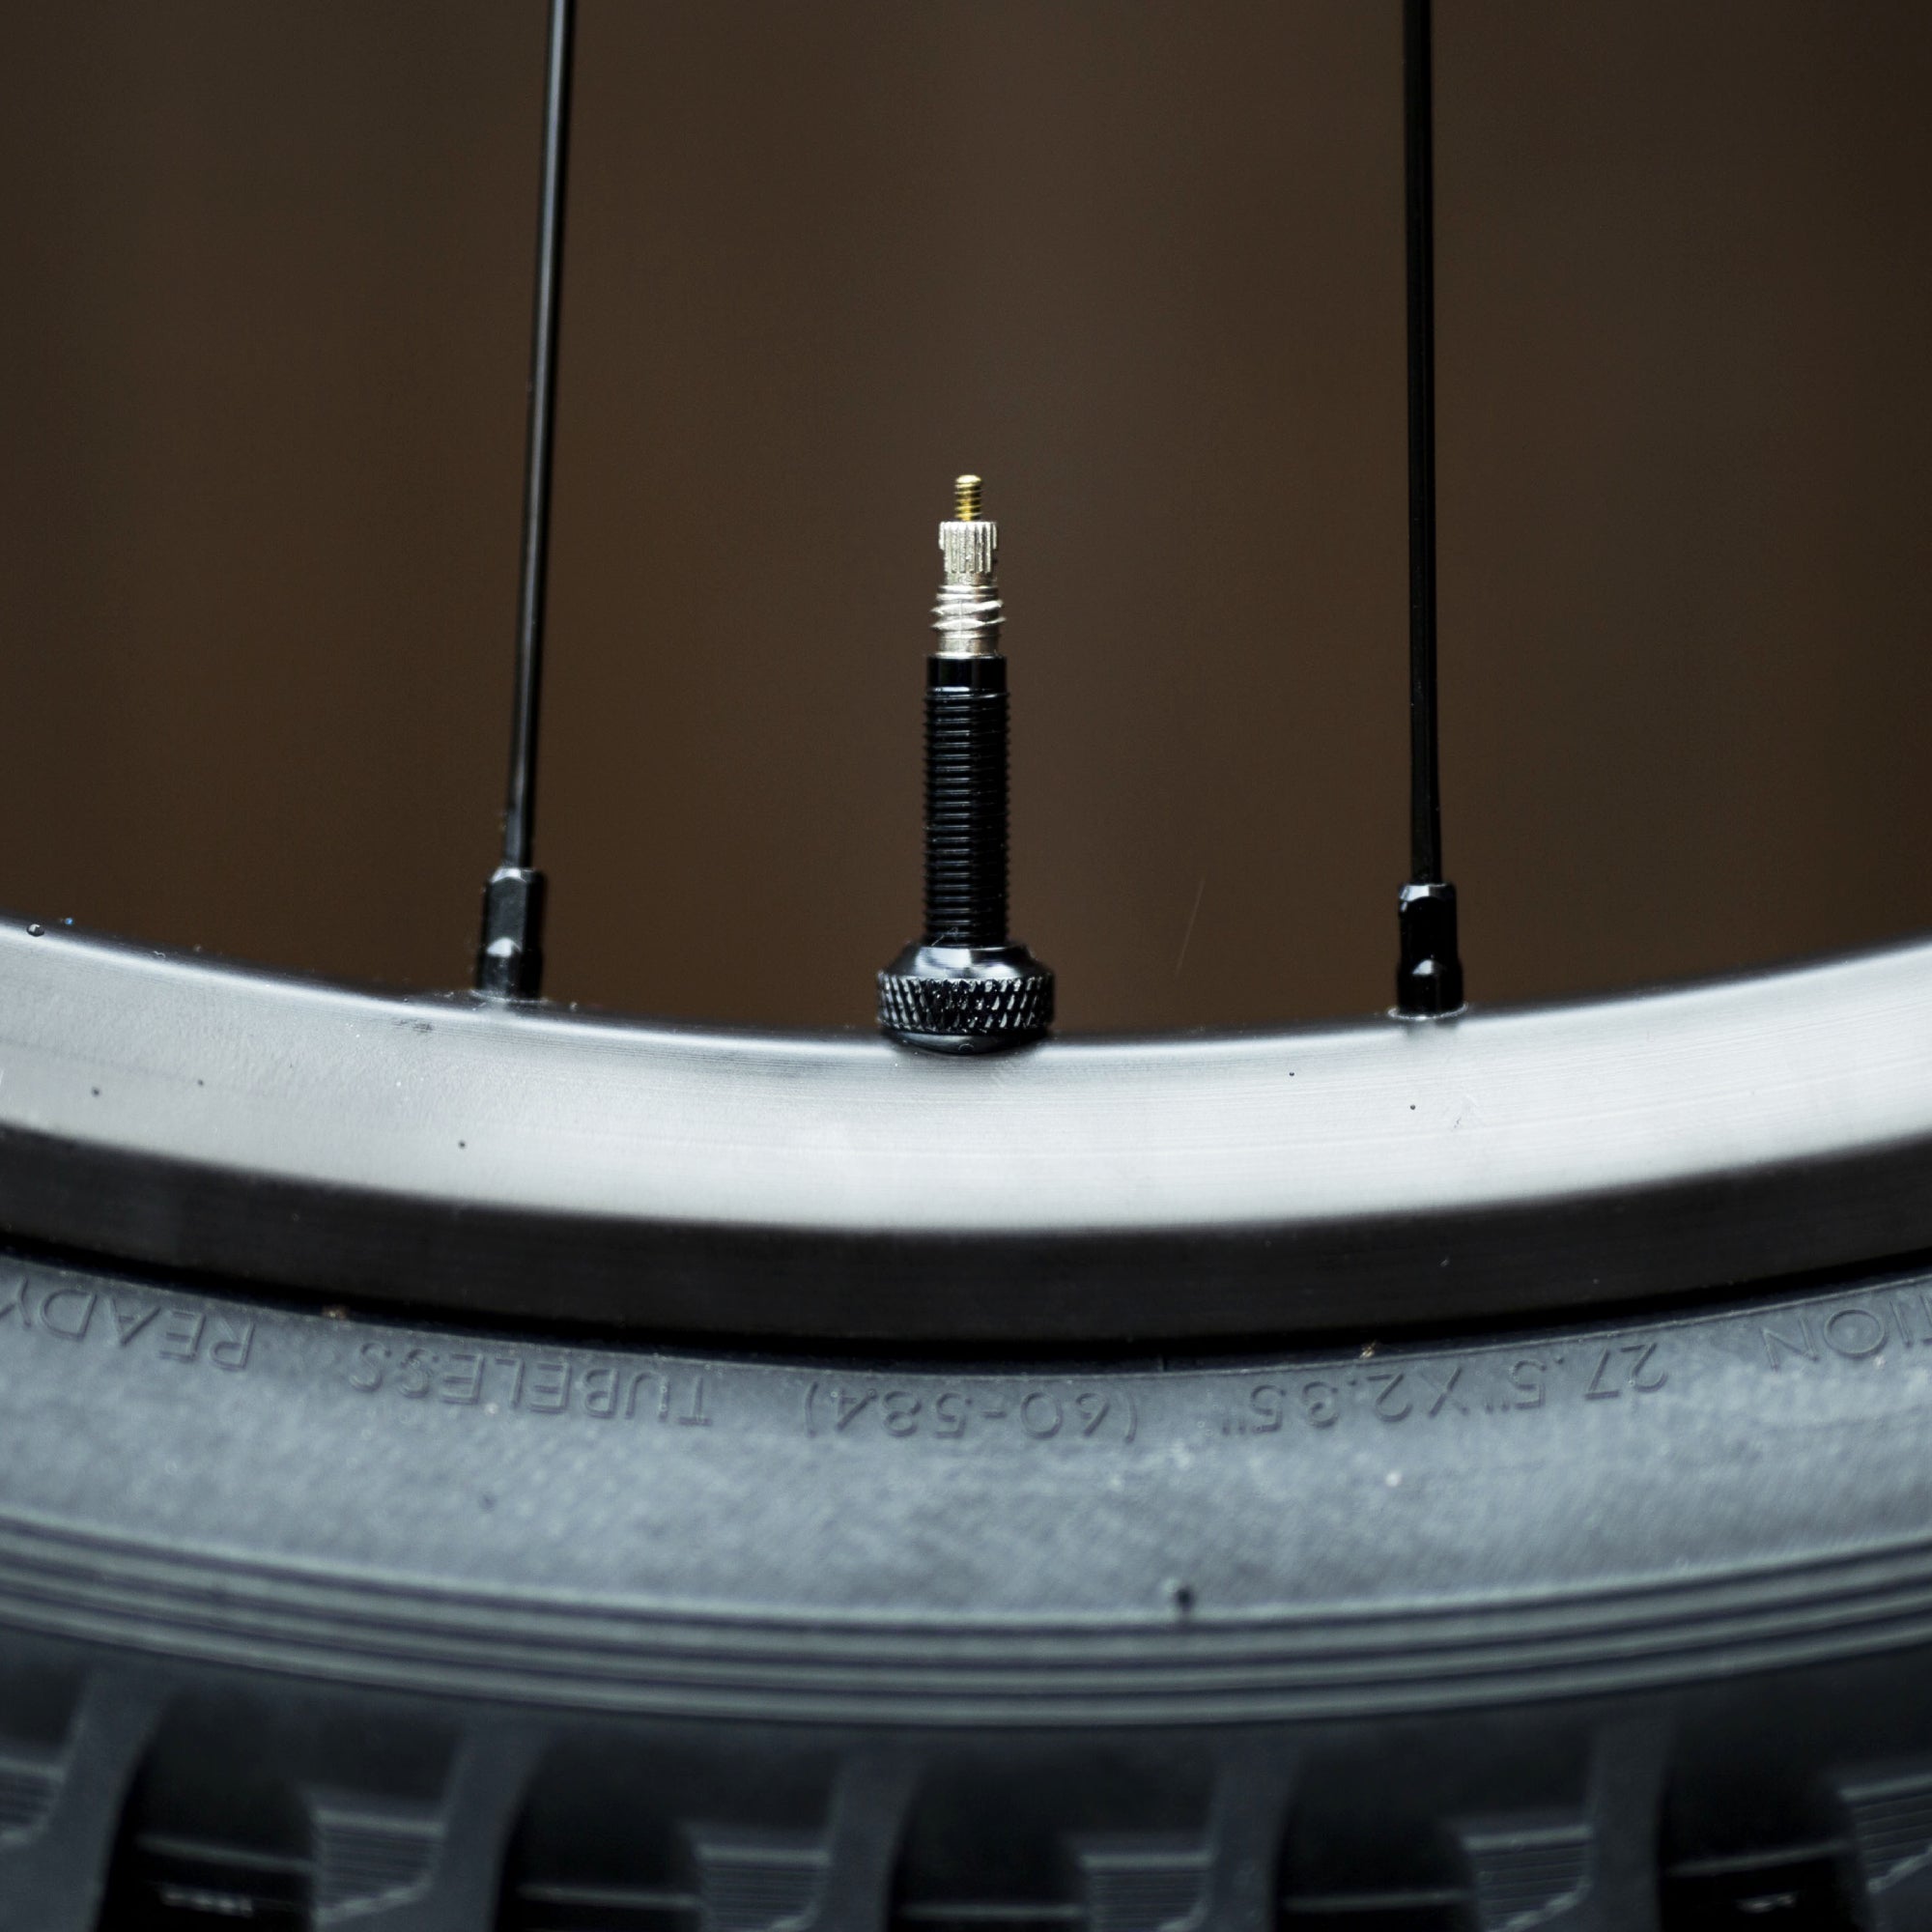 How to Pump Up a Bike Tire With Presta Valves